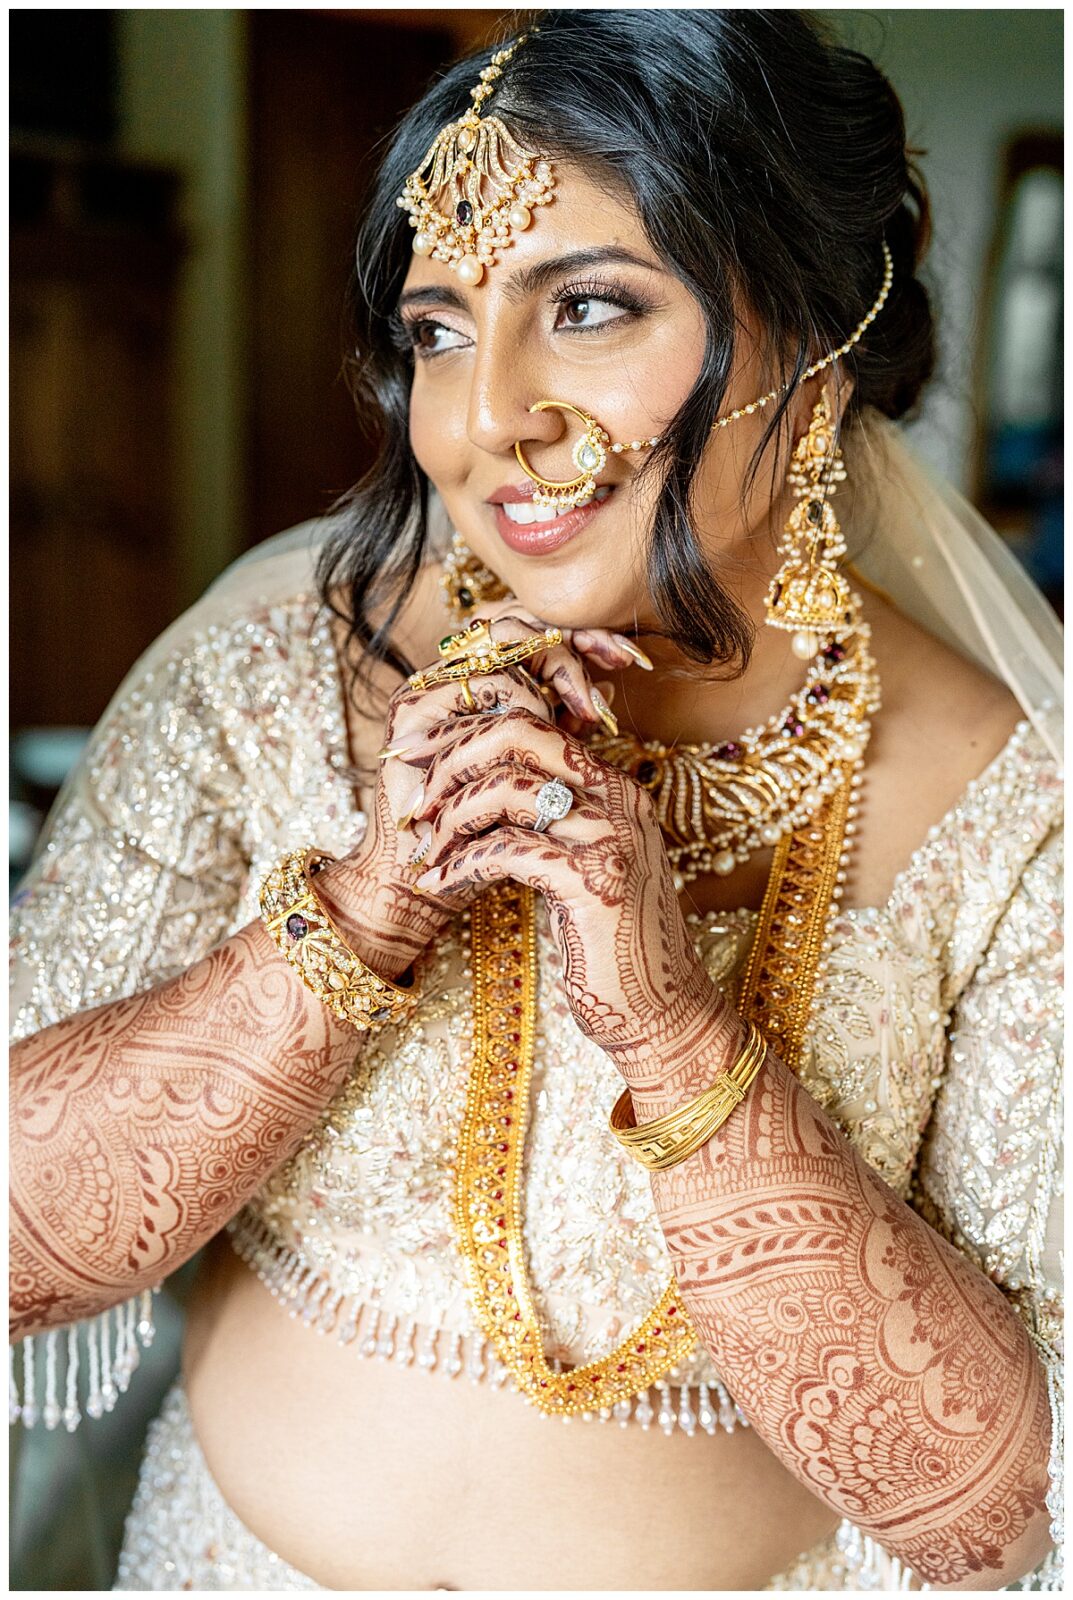 Light and airy style portrait of an Indian bride during her wedding at Willow and Oak Estates in Paso Robles, a vineyard and garden wedding venue.